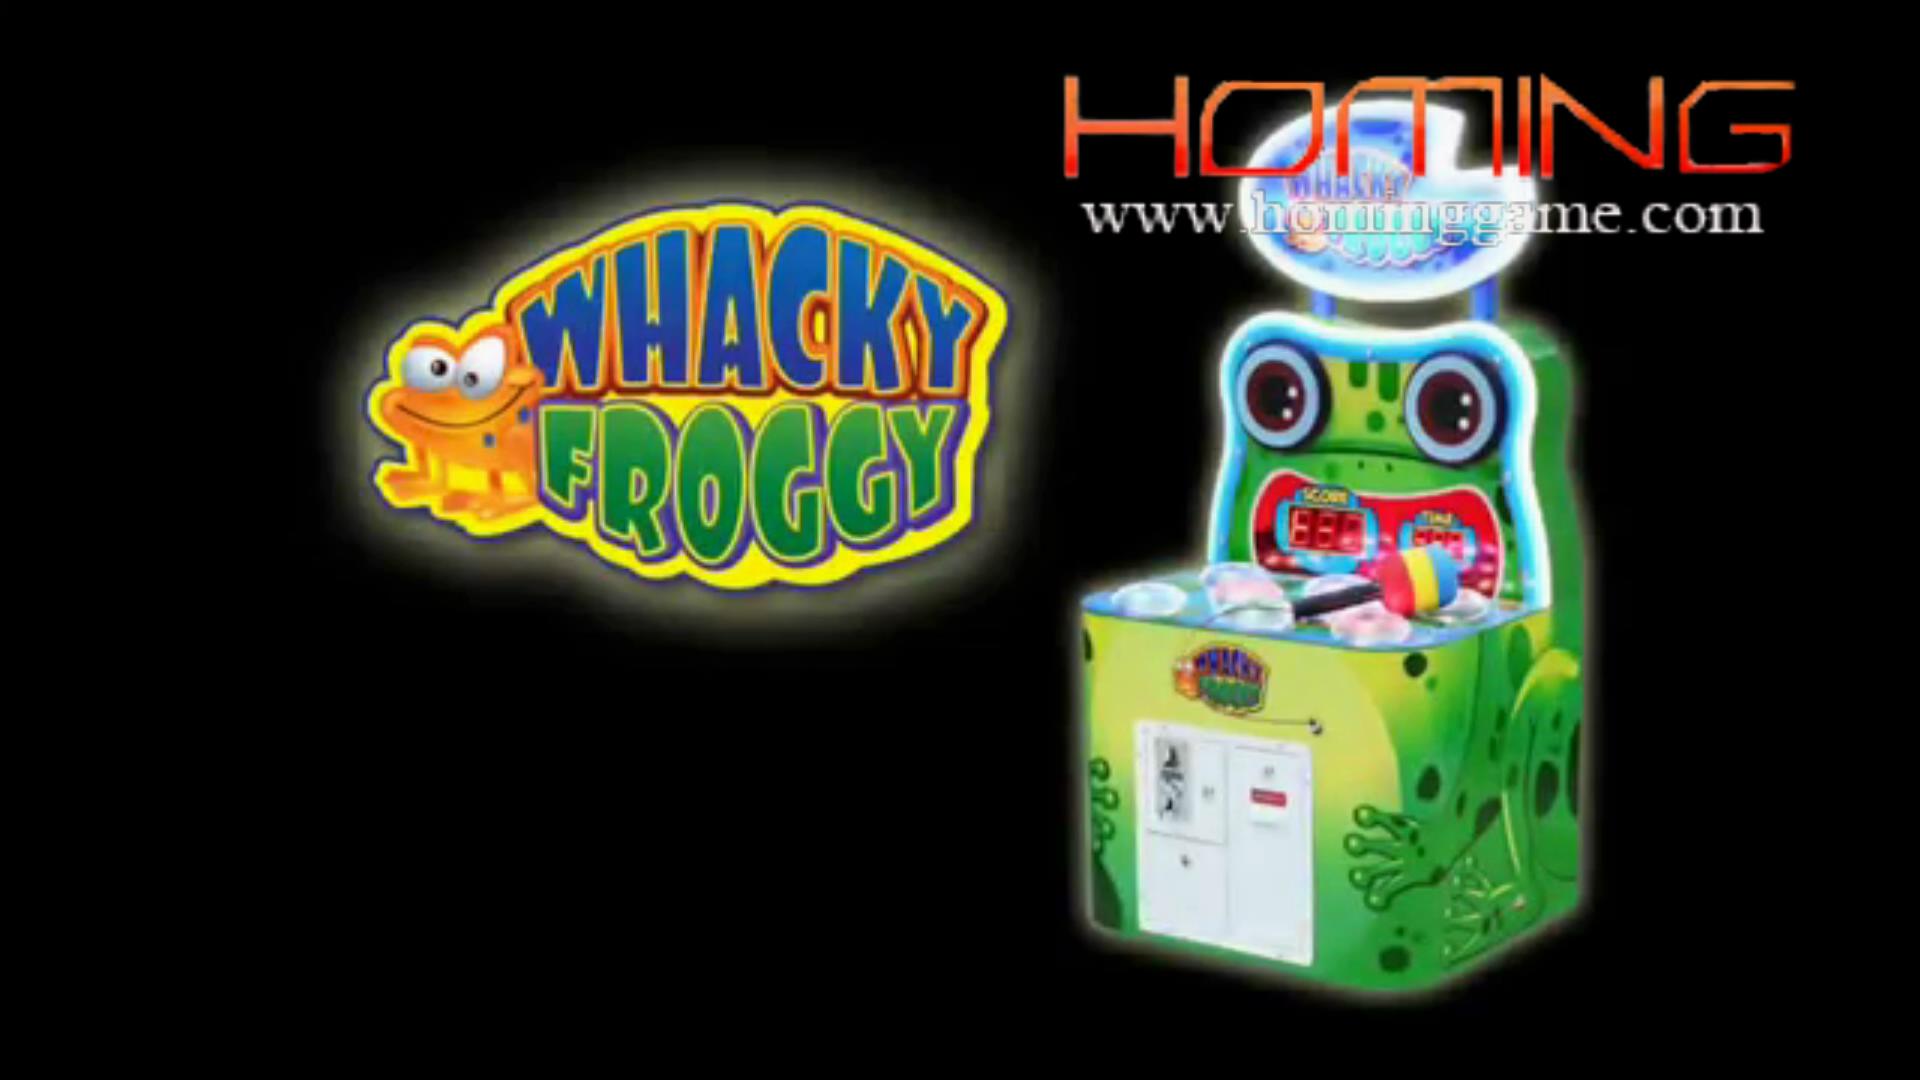 Whacky Frogggy Hit Hammer Arcade Redemption Game Machine,whacky froggy game,whacky froggy,whacky froggy redemption game,hit frog game machine,hammer arcade game,hit hammer arcade game machine,game machine,arcade game machine,coin operated game machine,amusement park game machine,indoor game machine,slot game machine,kids game machine,entertainment game machine,slot machine